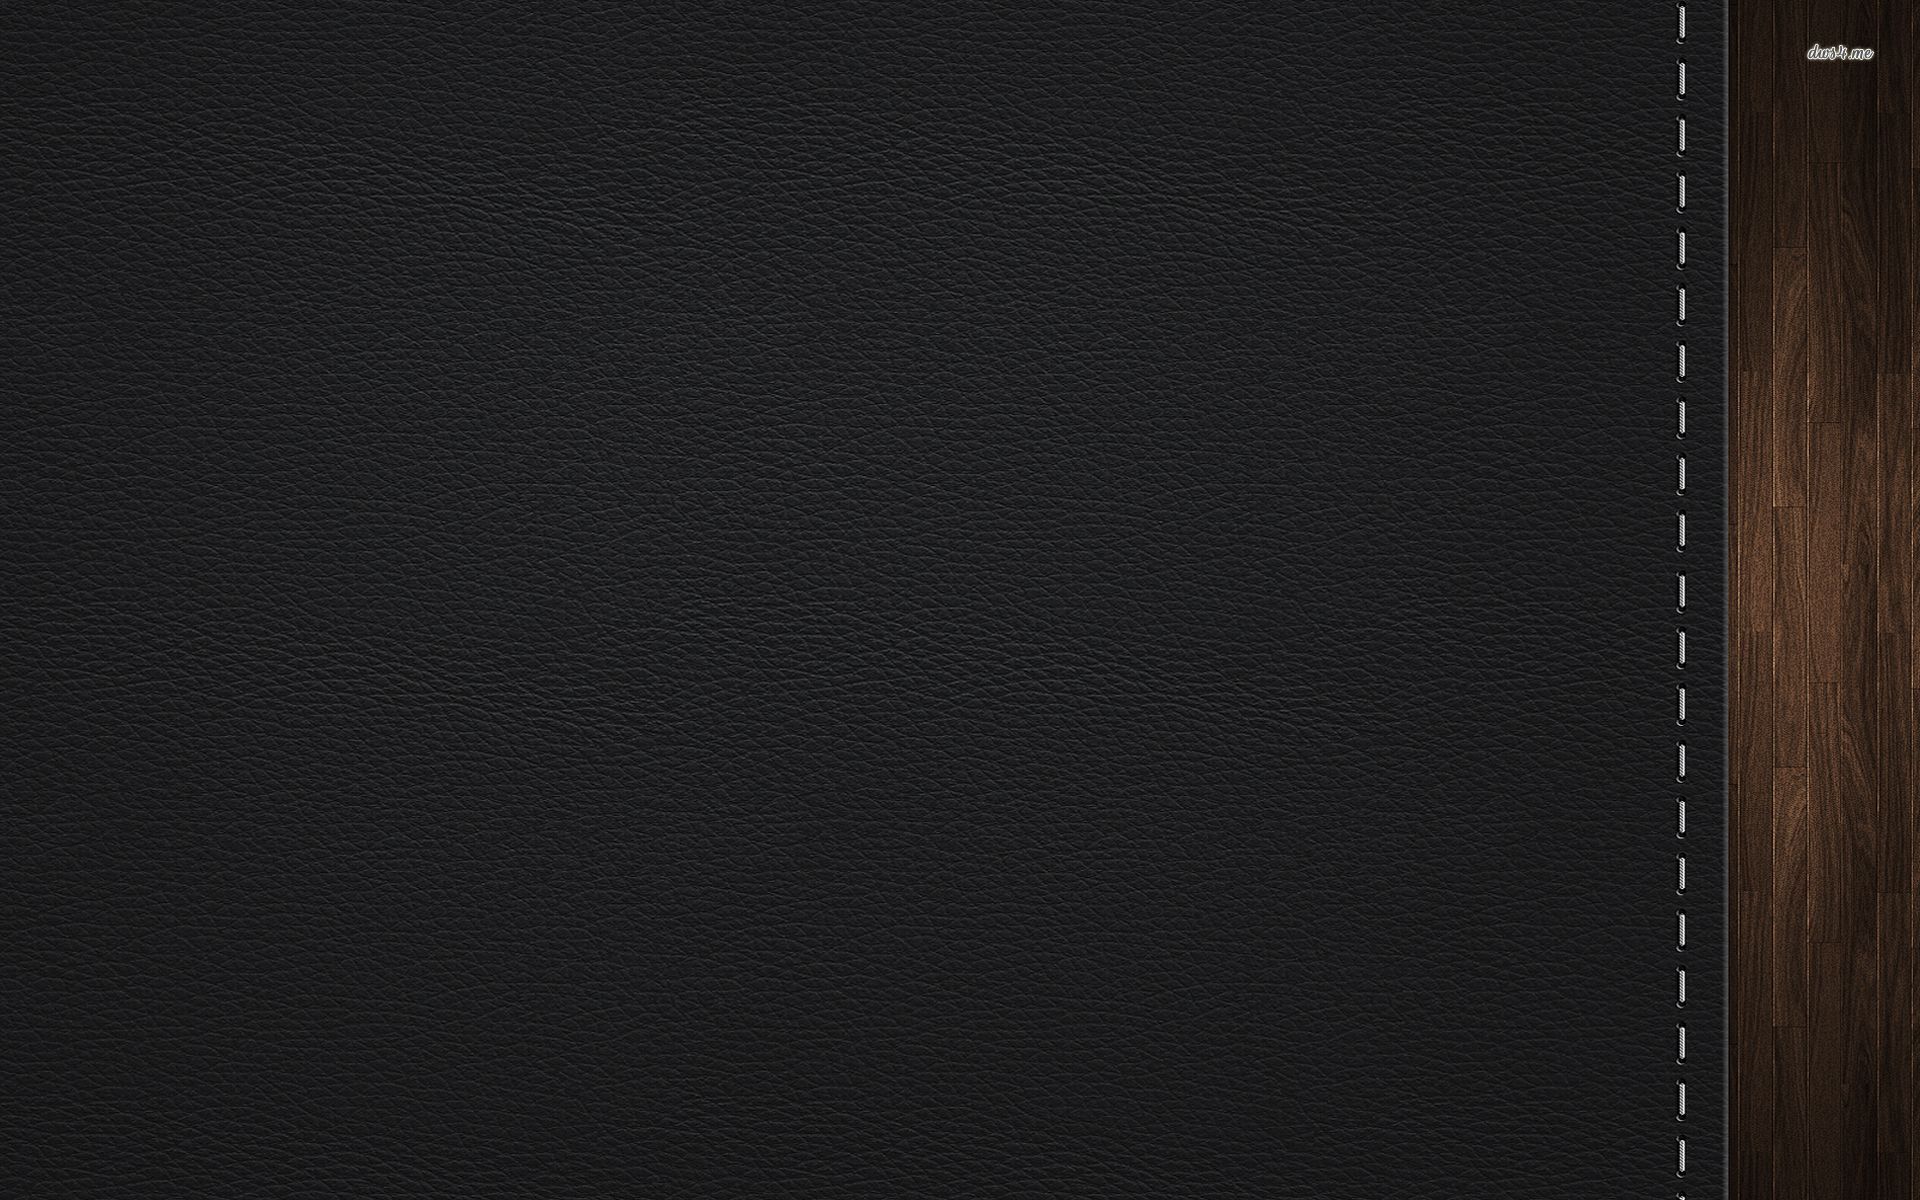 Notebook Cover wallpaper - Abstract wallpapers